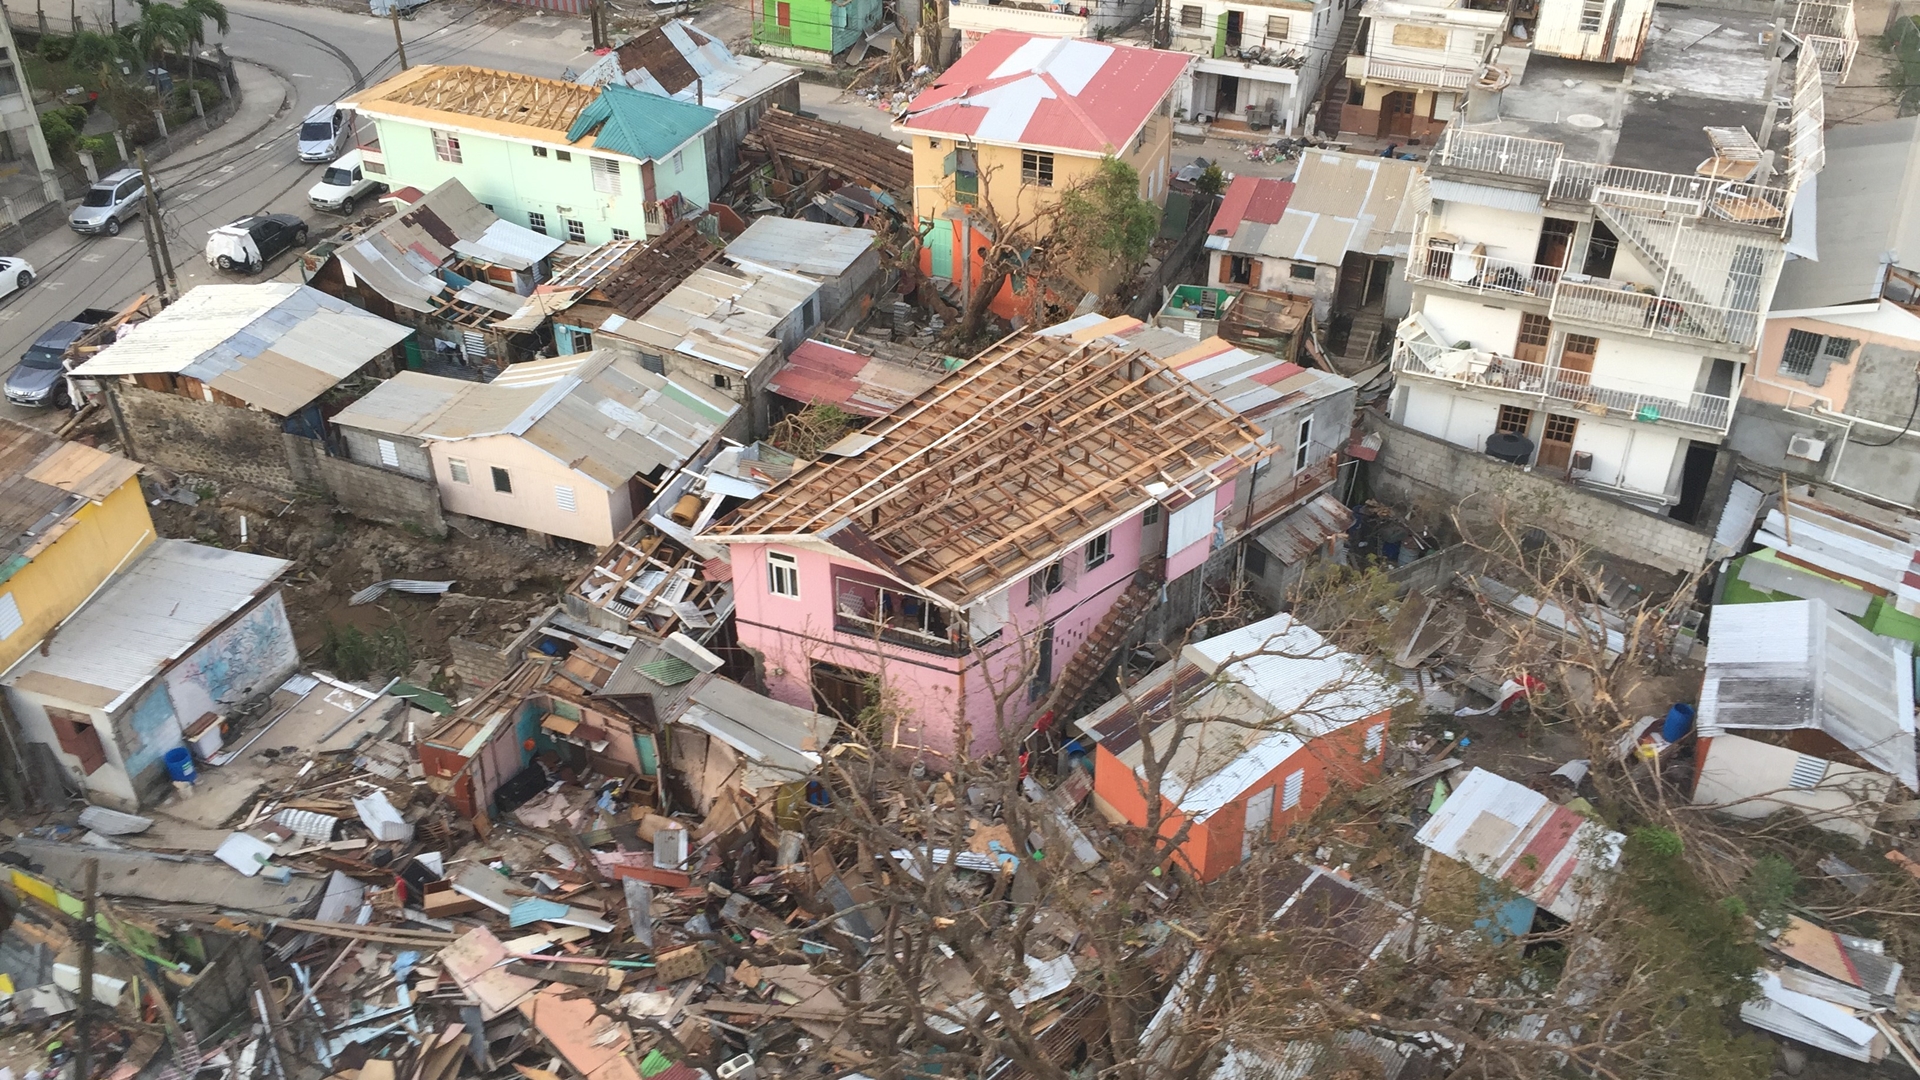 After Hurricane Maria made landfall in the Caribbean, two Carolinas HealthCare System physicians joined the relief efforts as volunteers of Team Rubicon.  